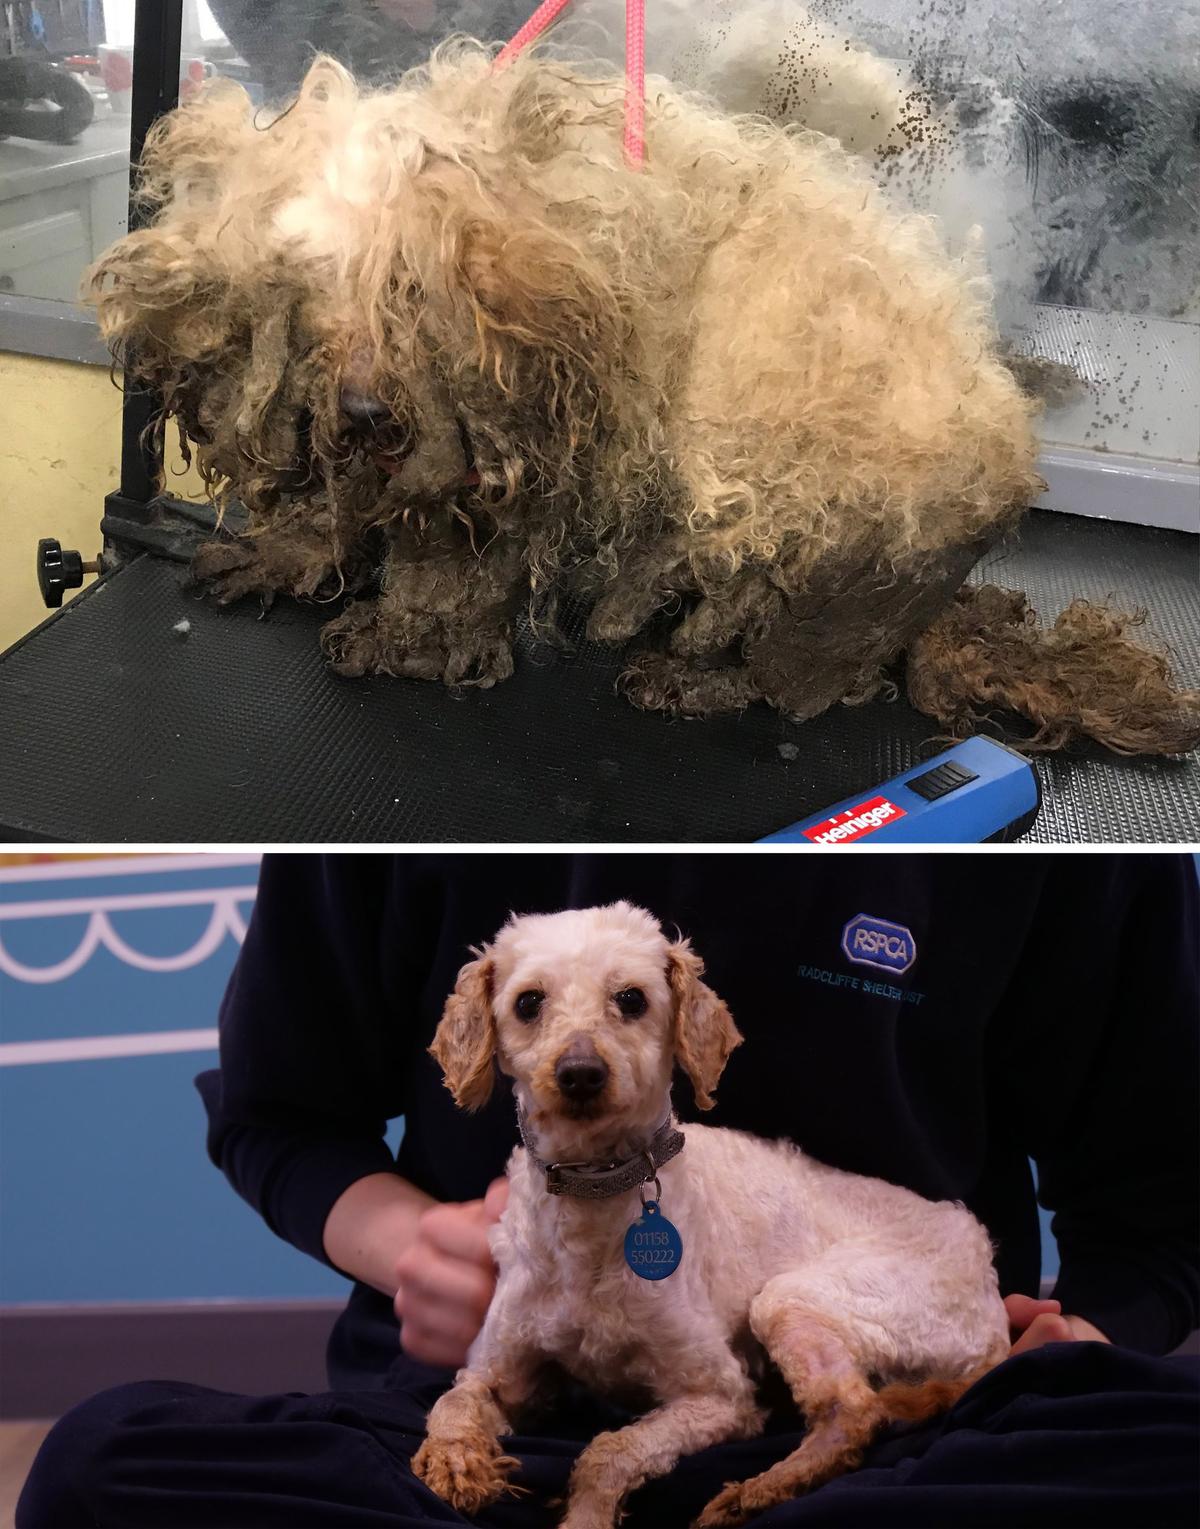 Before-and-after photos show 7-year-old poodle mix Monty's transformation. (Courtesy of <a href="https://www.rspca.org.uk/">RSPCA</a>)